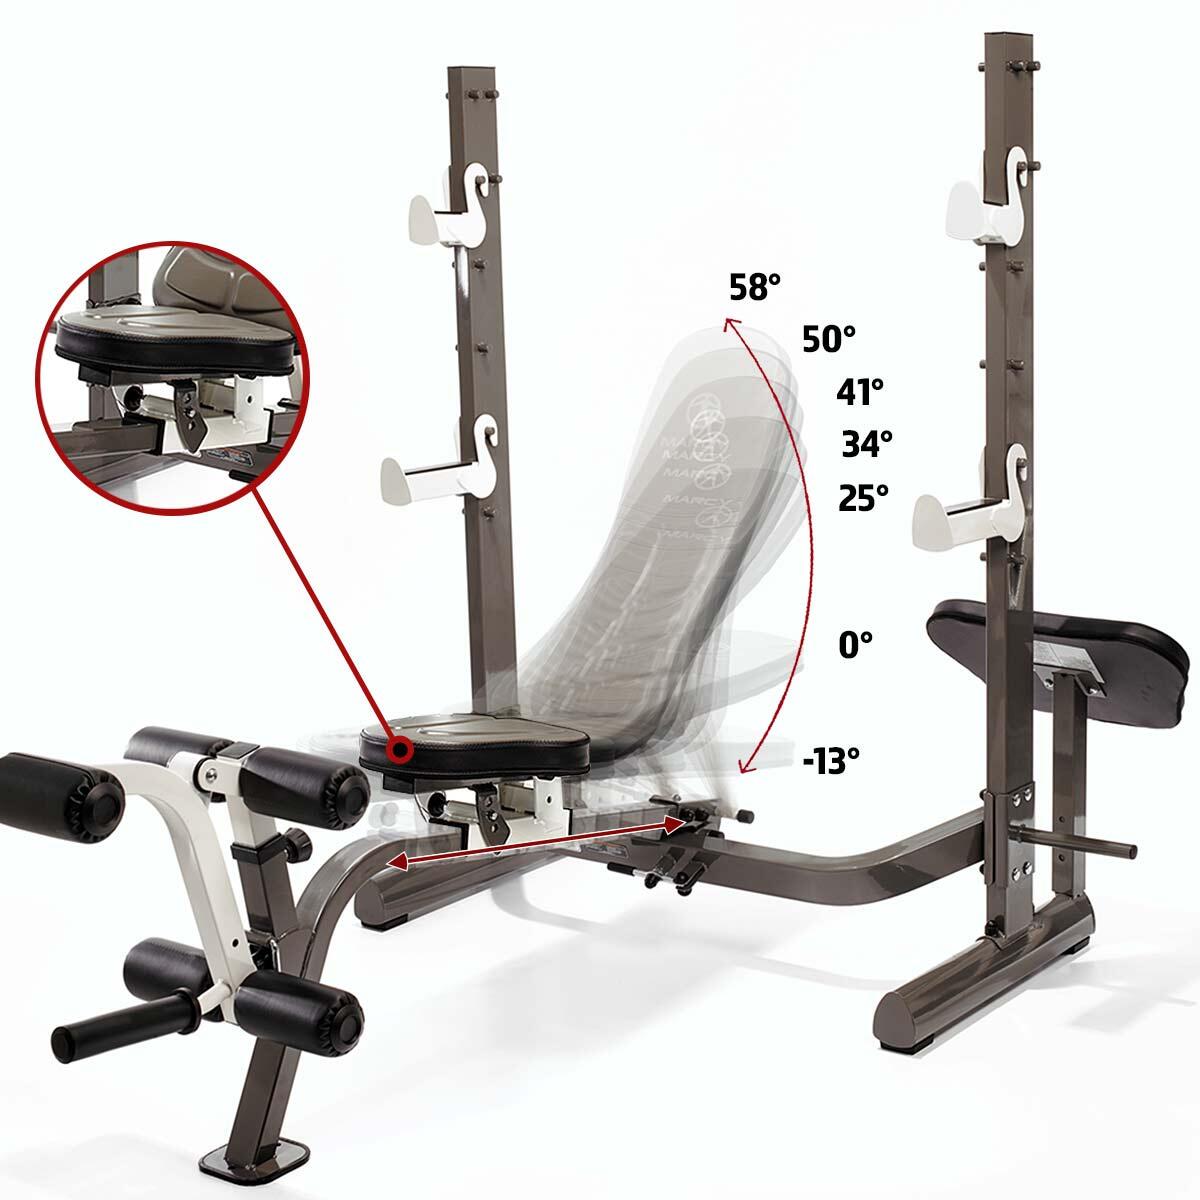 MARCY MWB-70205 FOLDING OLYMPIC BENCH WITH REAR SQUAT RACK 4/7